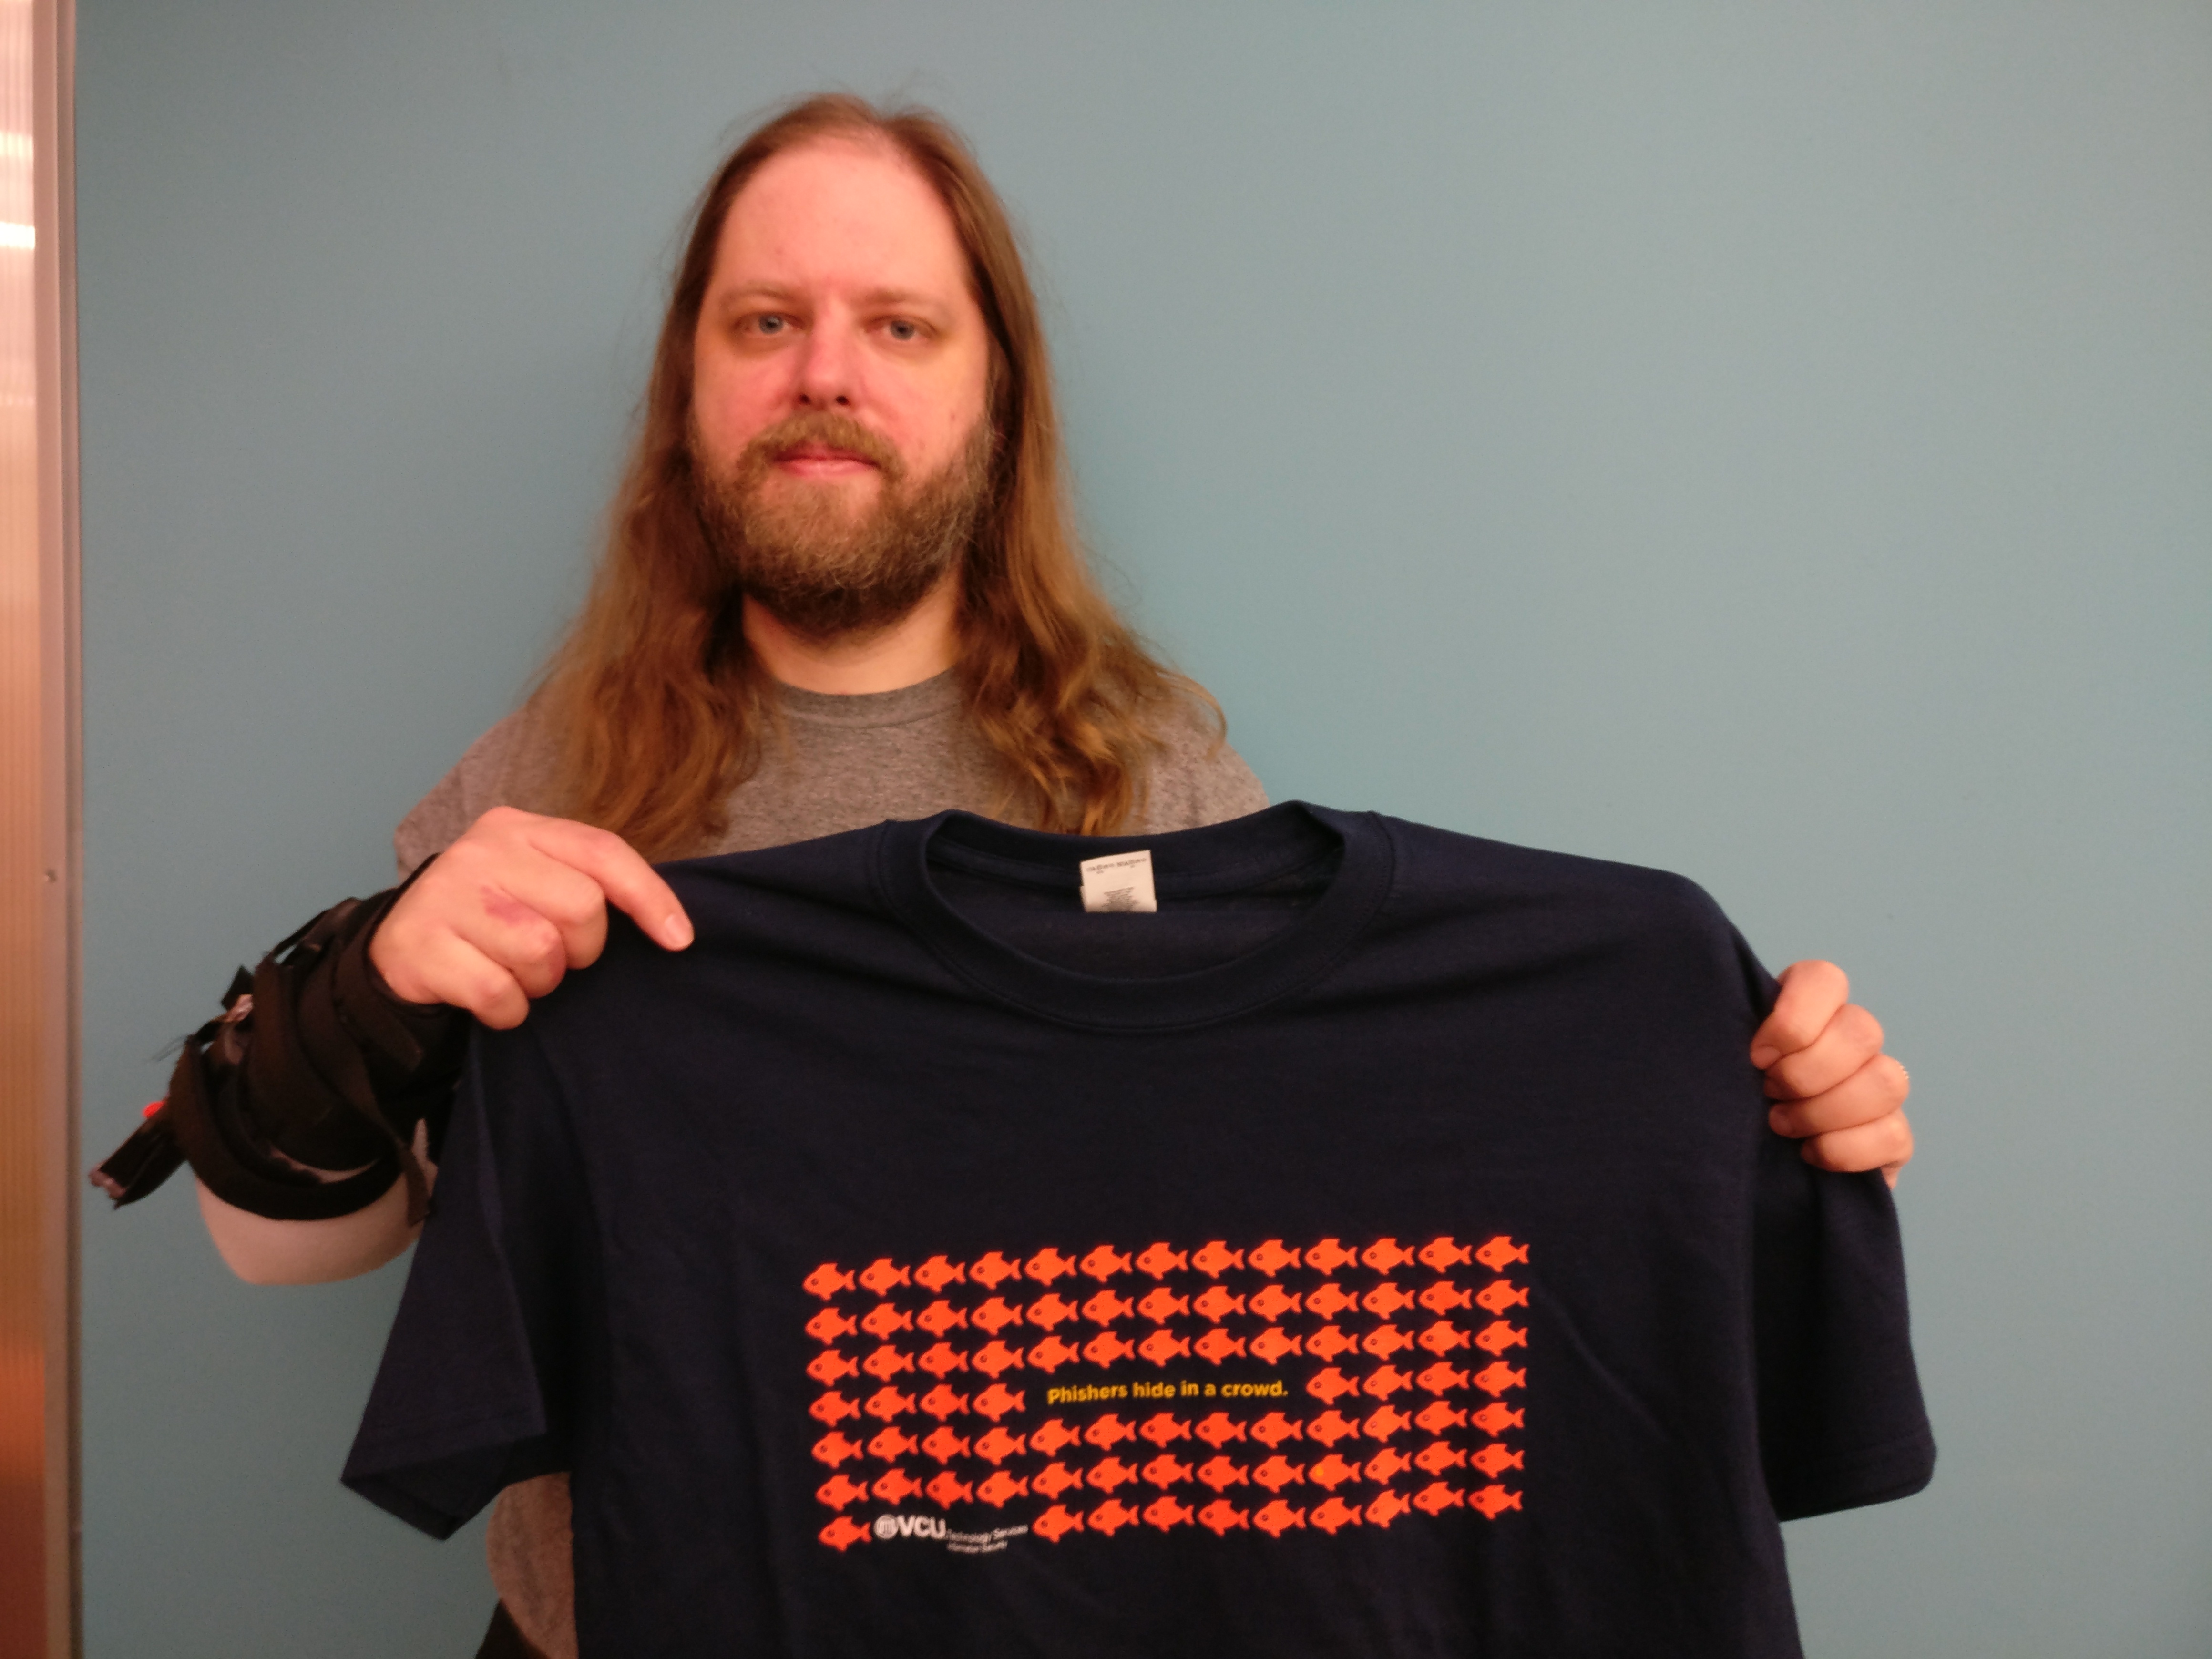 Photo of Matthew Martin holding a phishers hide in a crowd tee.